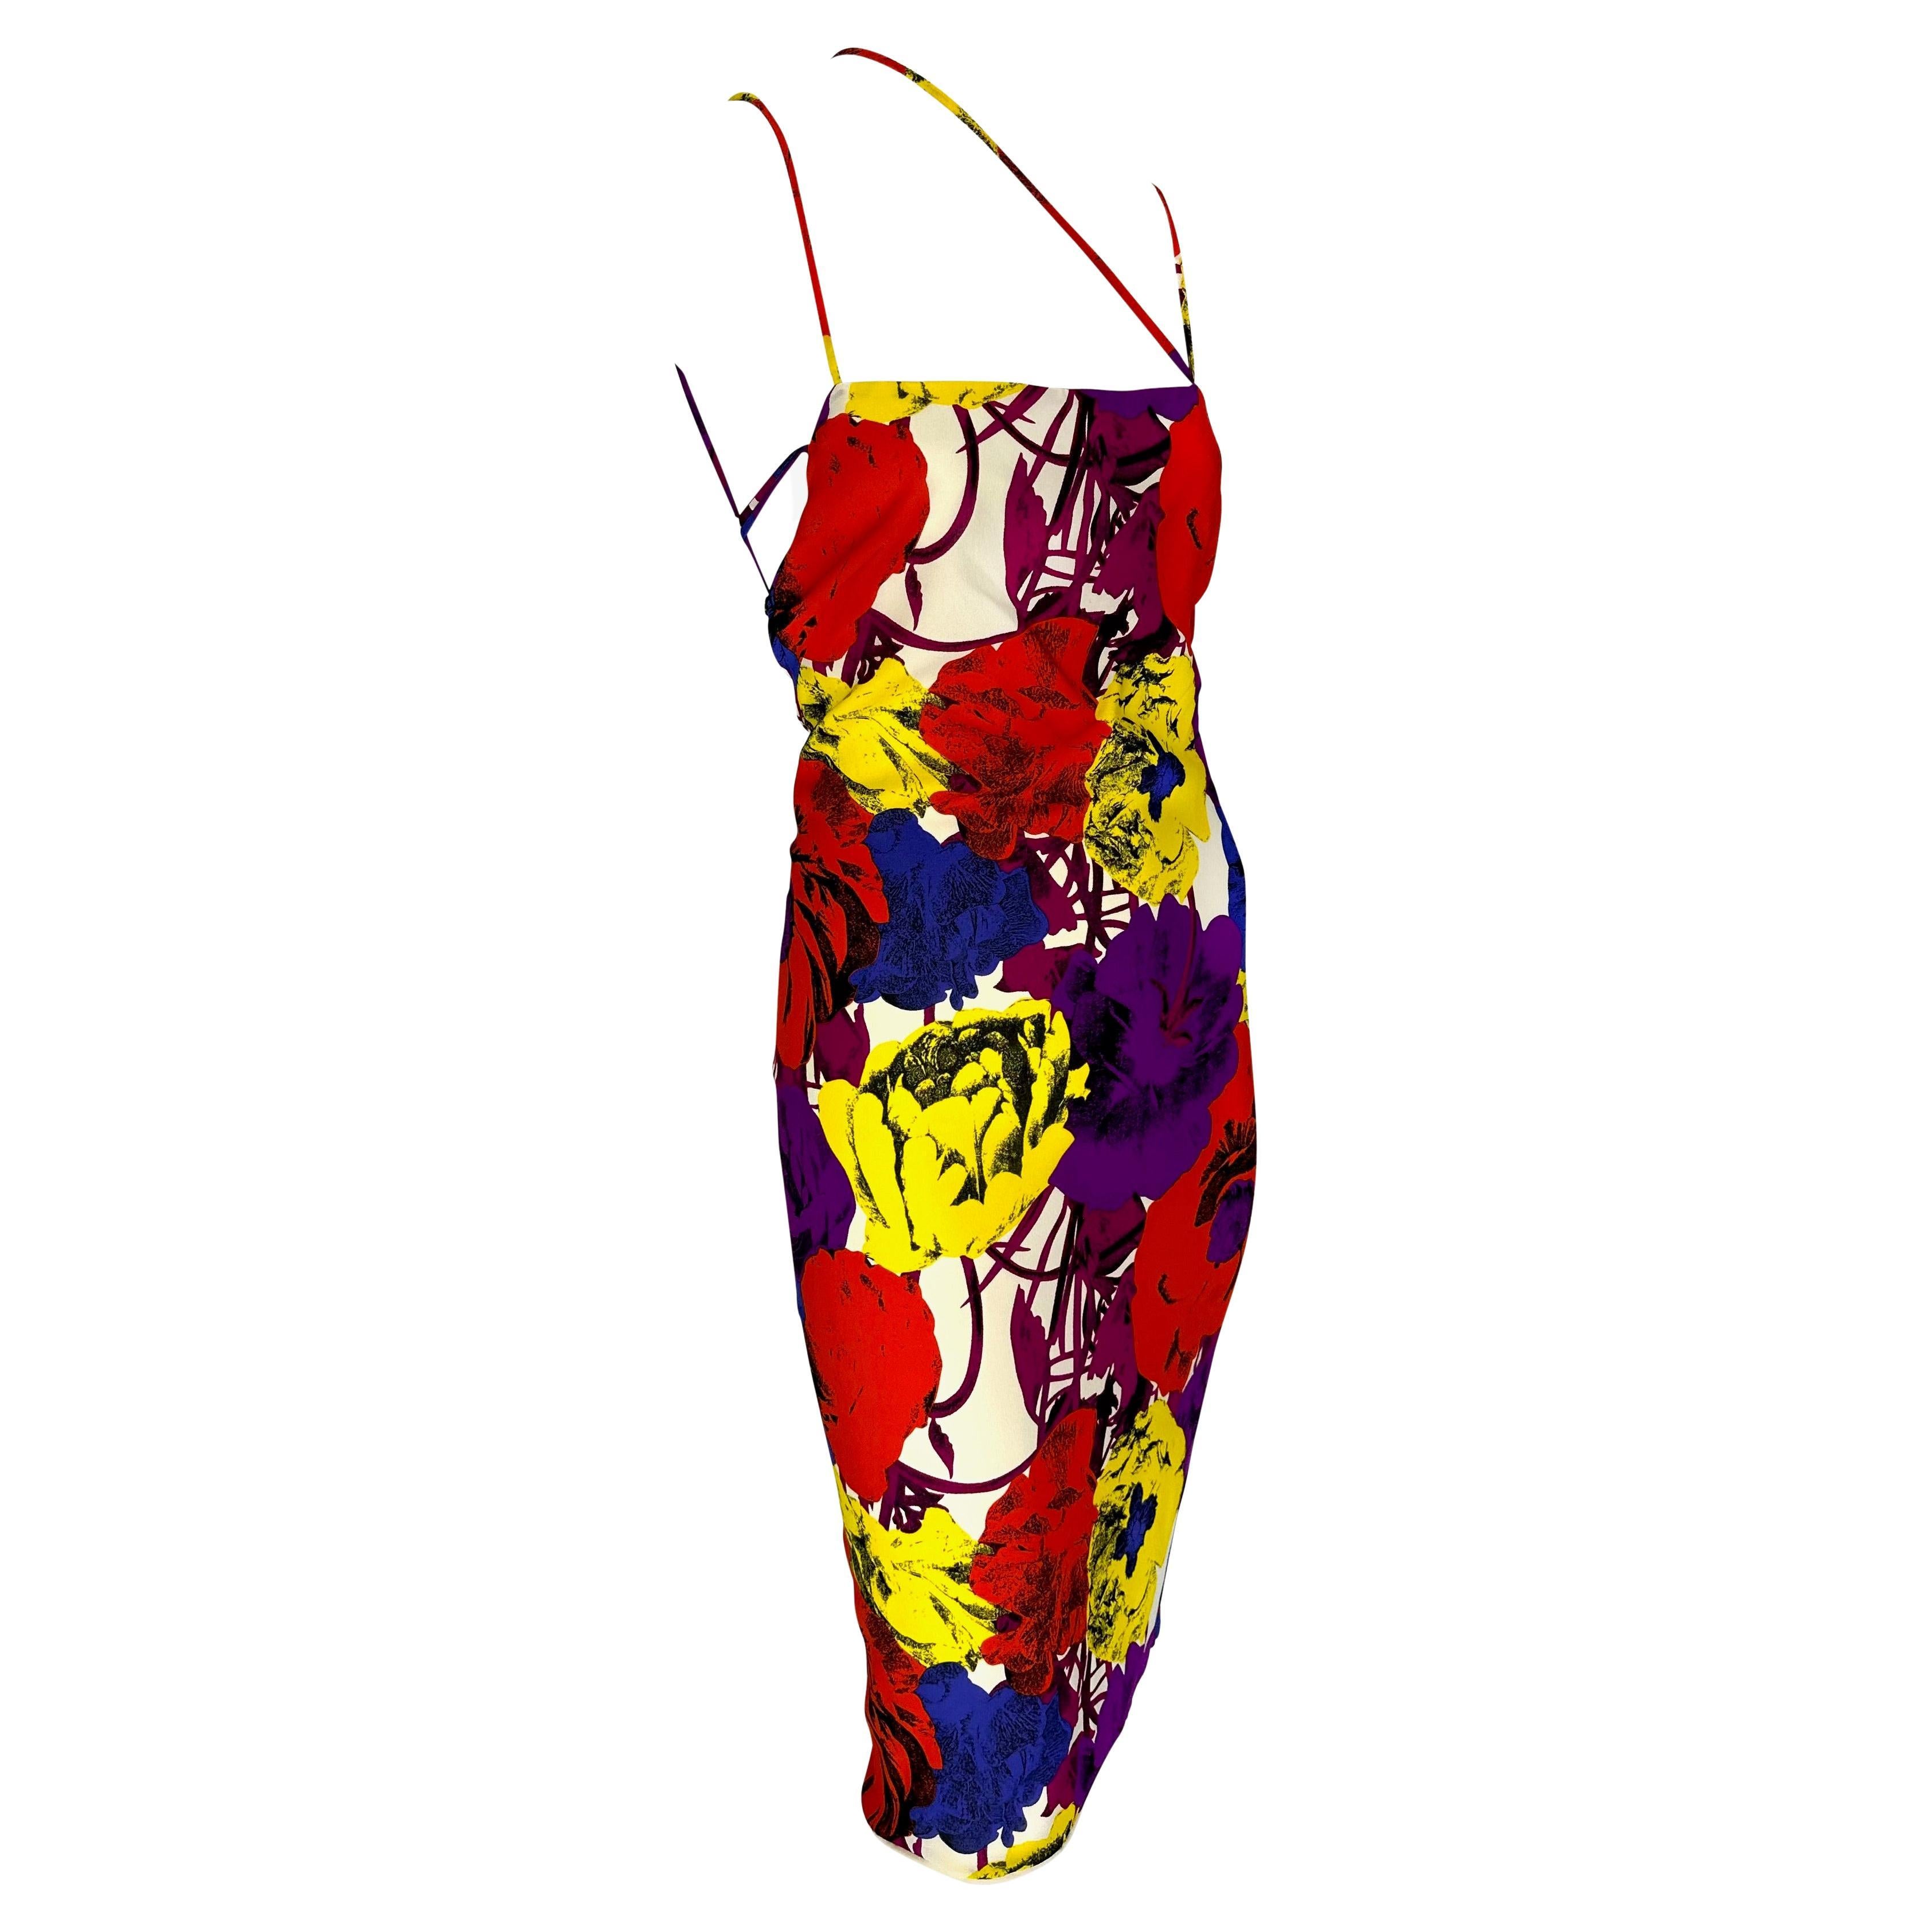 S/S 2002 Gianni Versace by Donatella Pop Art Floral Print Lace-Up Backless Dress For Sale 6